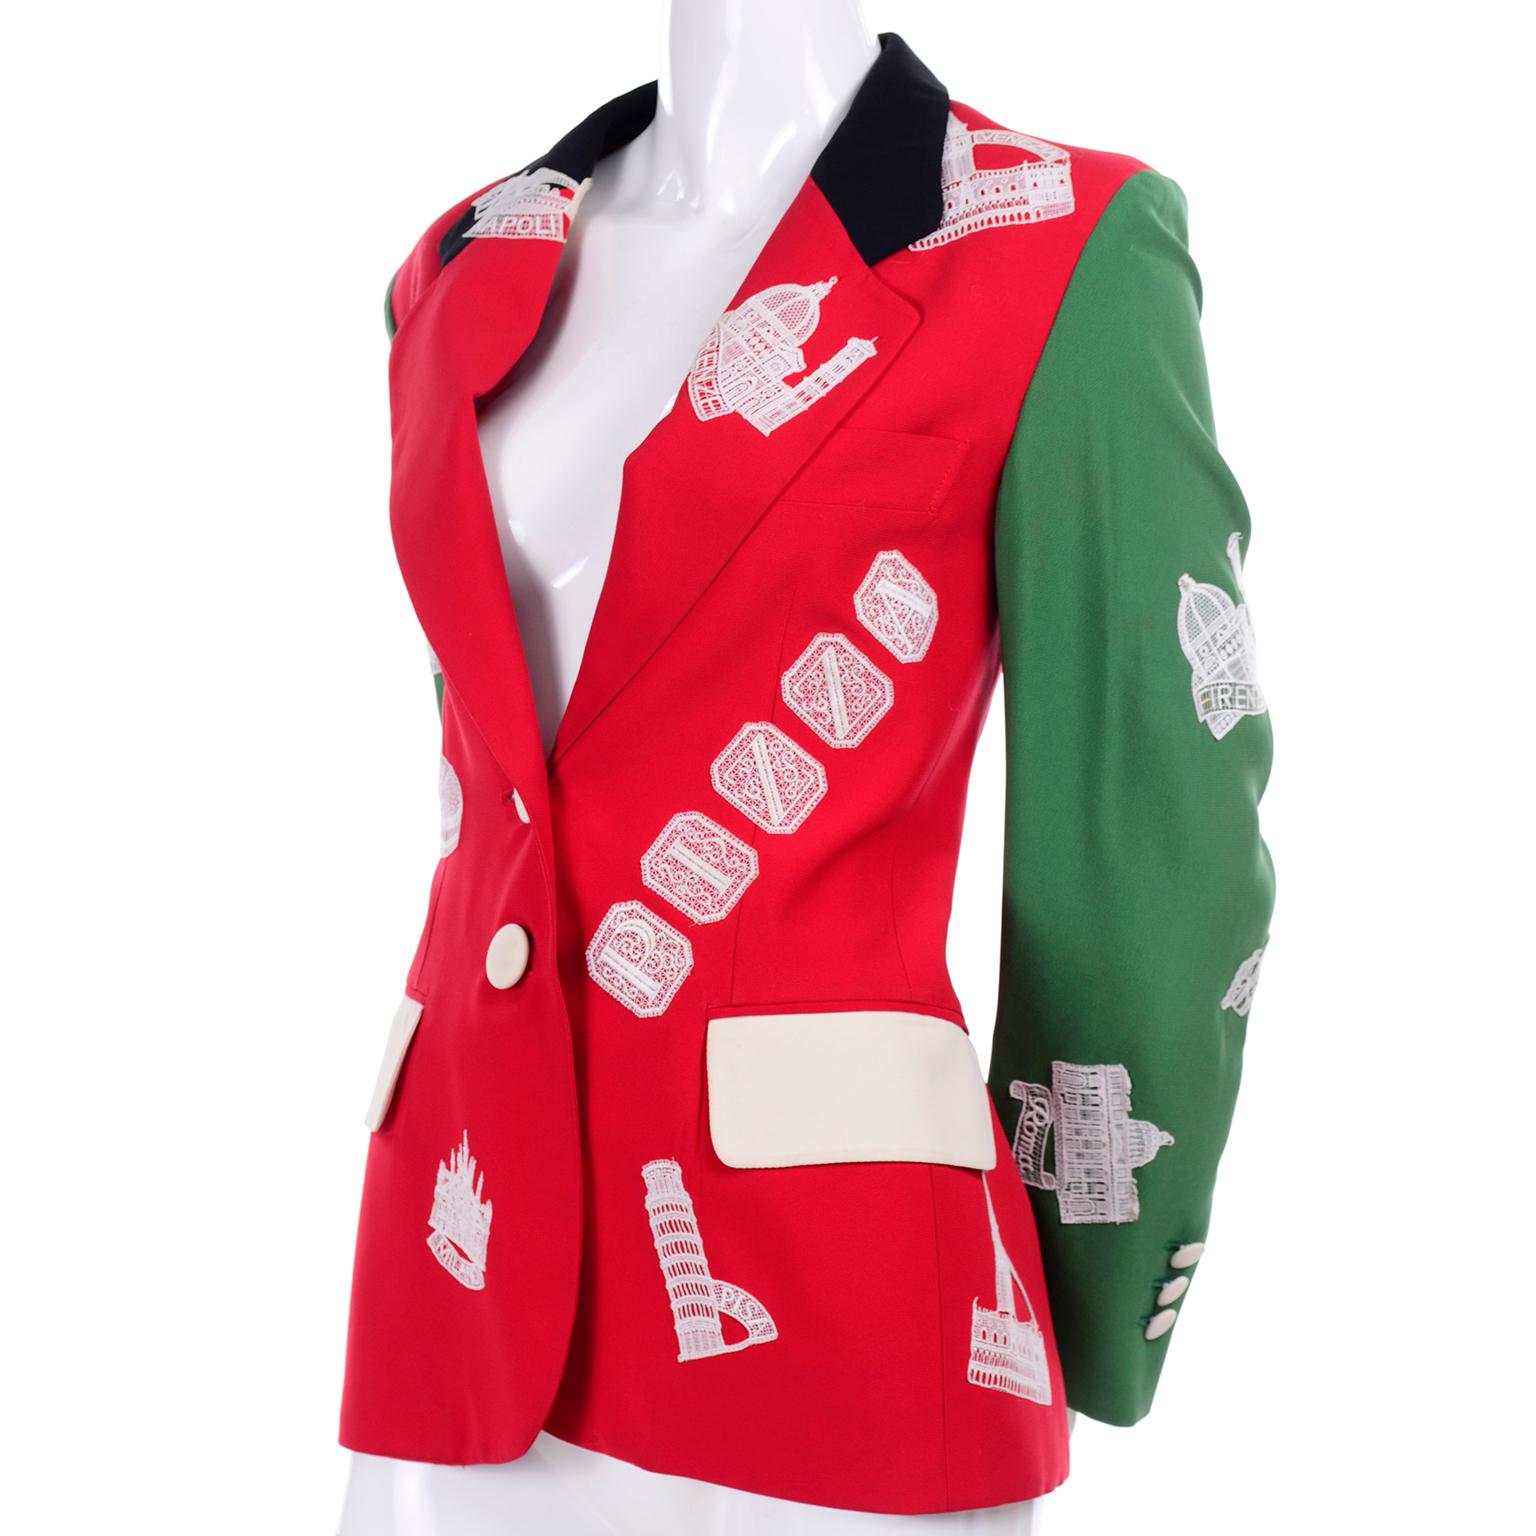 This rare Moschino blazer is from the Moschino Couture! 1991 Spring Summer Collection.  The jacket was designed by Franco Moschino and features a red body, ivory pocket flaps, a black collar and green sleeves.  The piece is appliqued with white lace